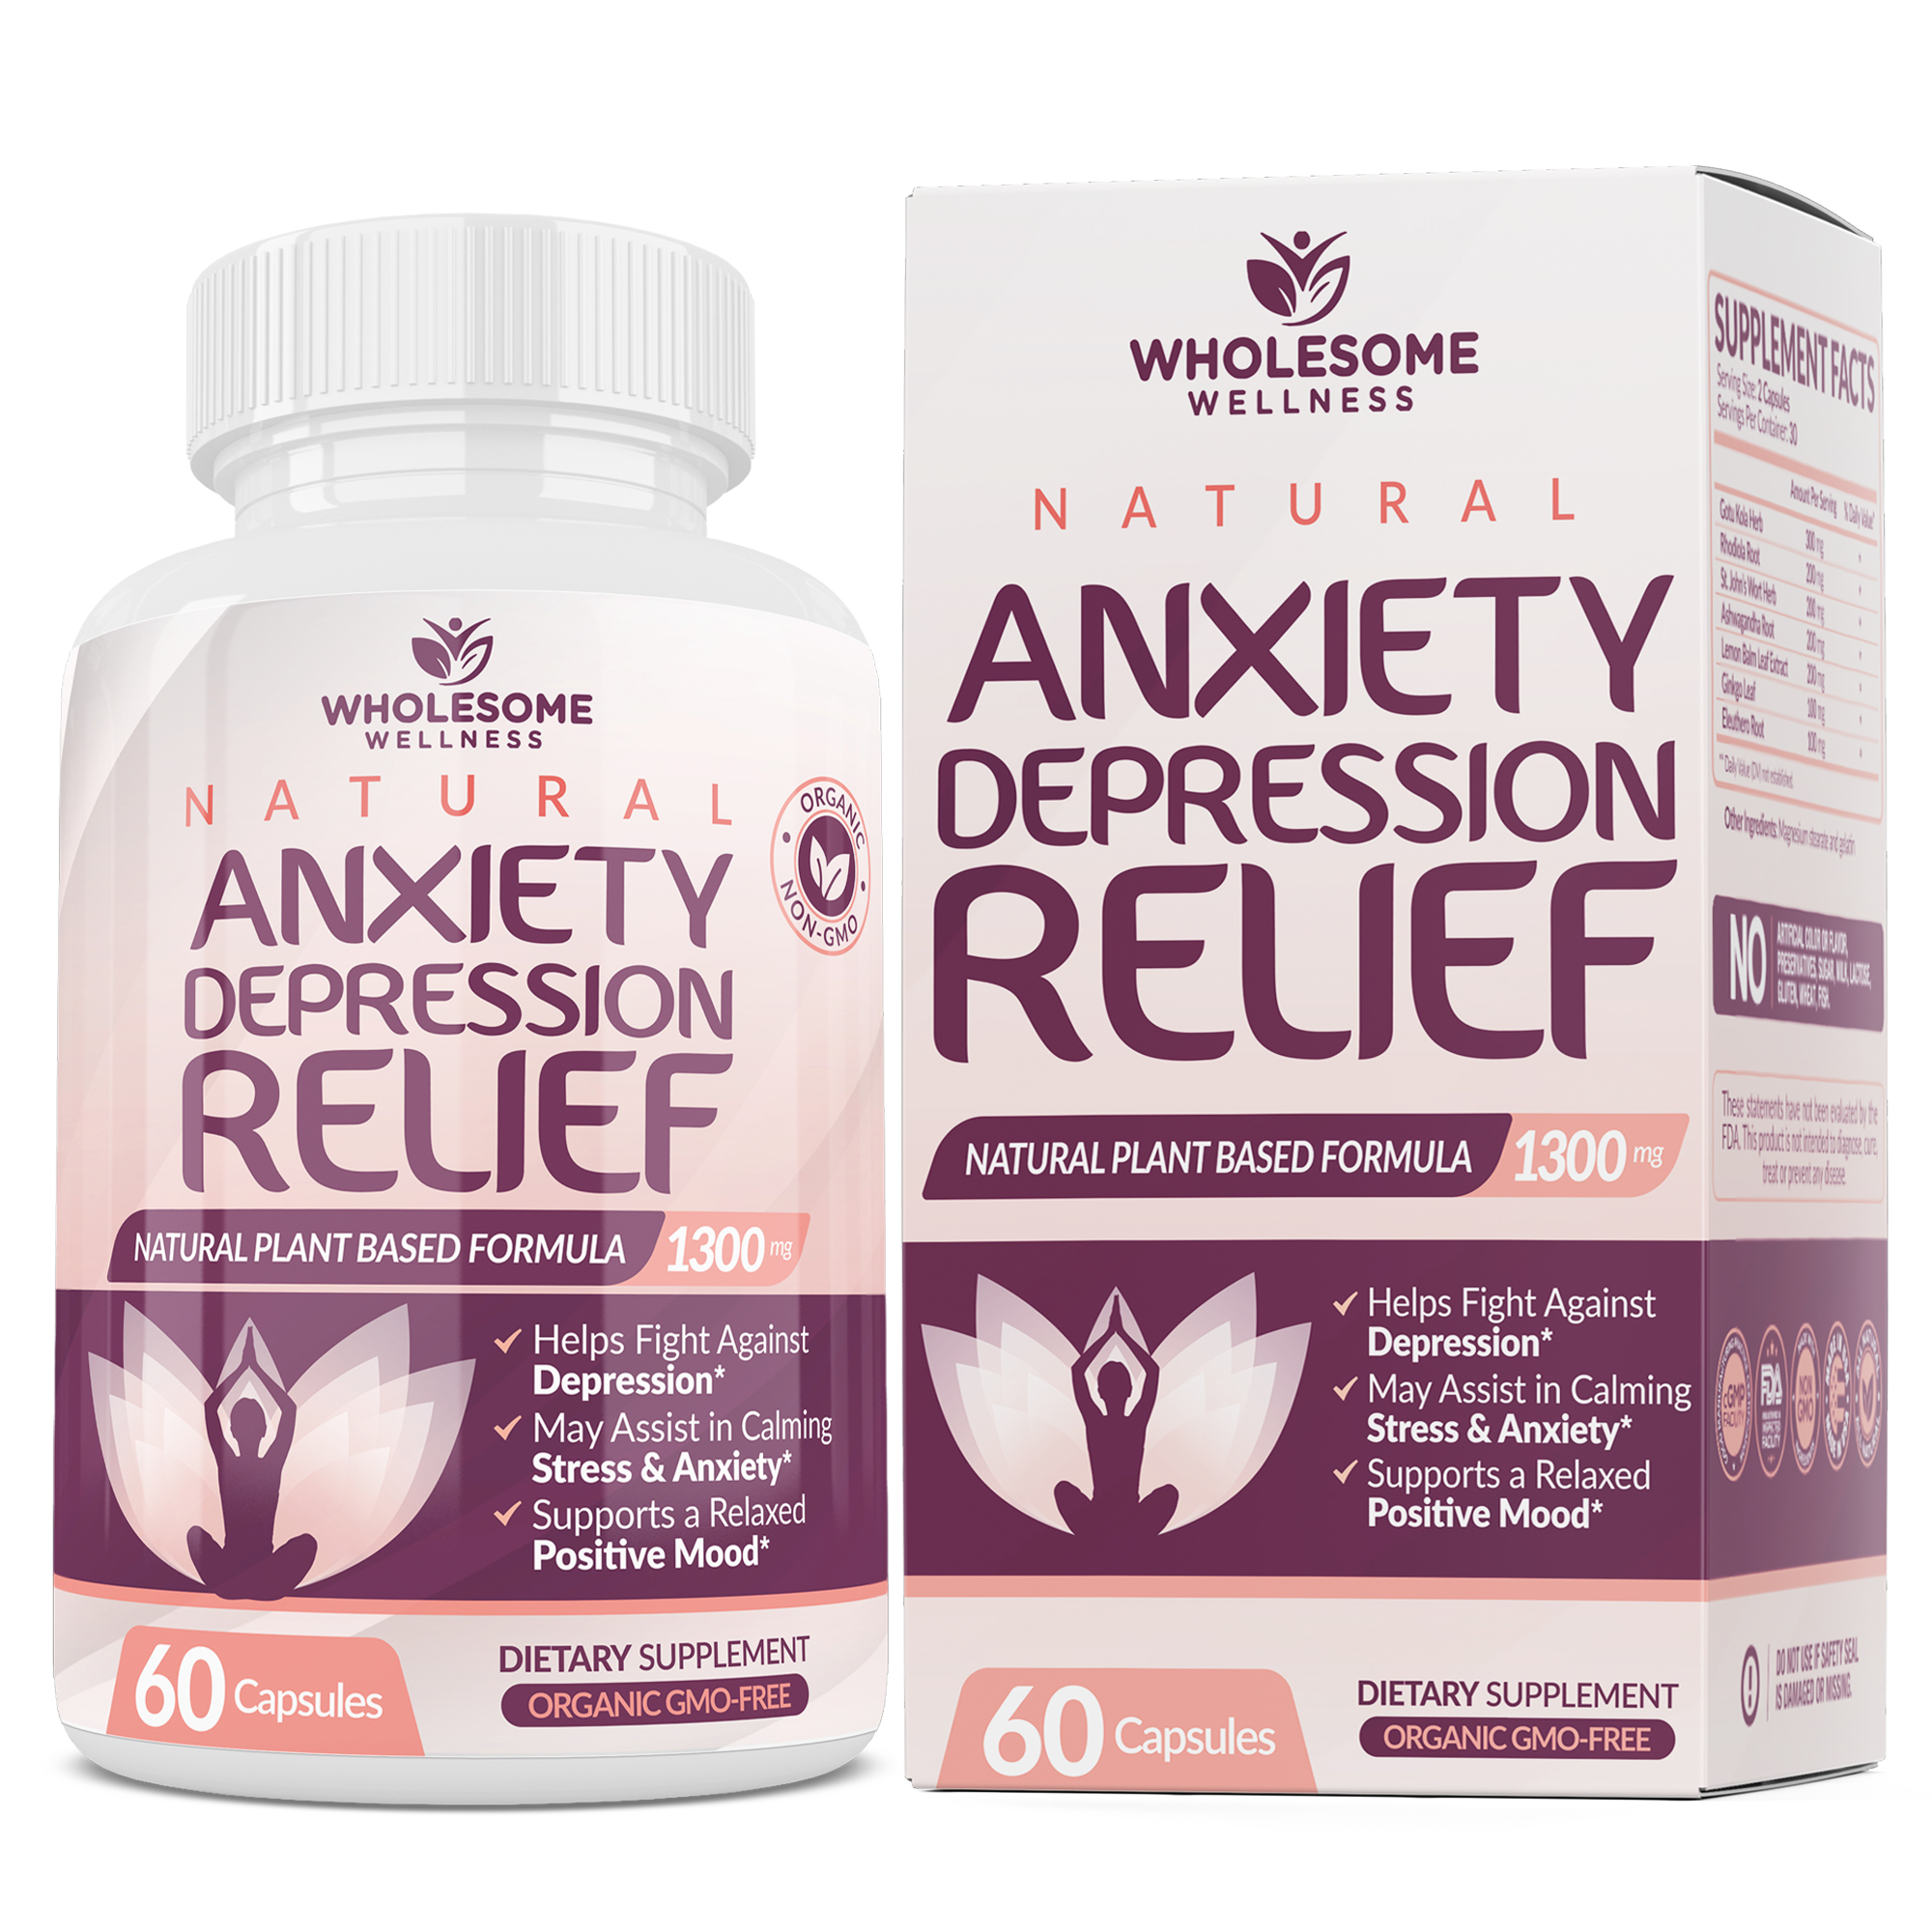 Natural Anxiety Relief Depression Wholesome Wellness